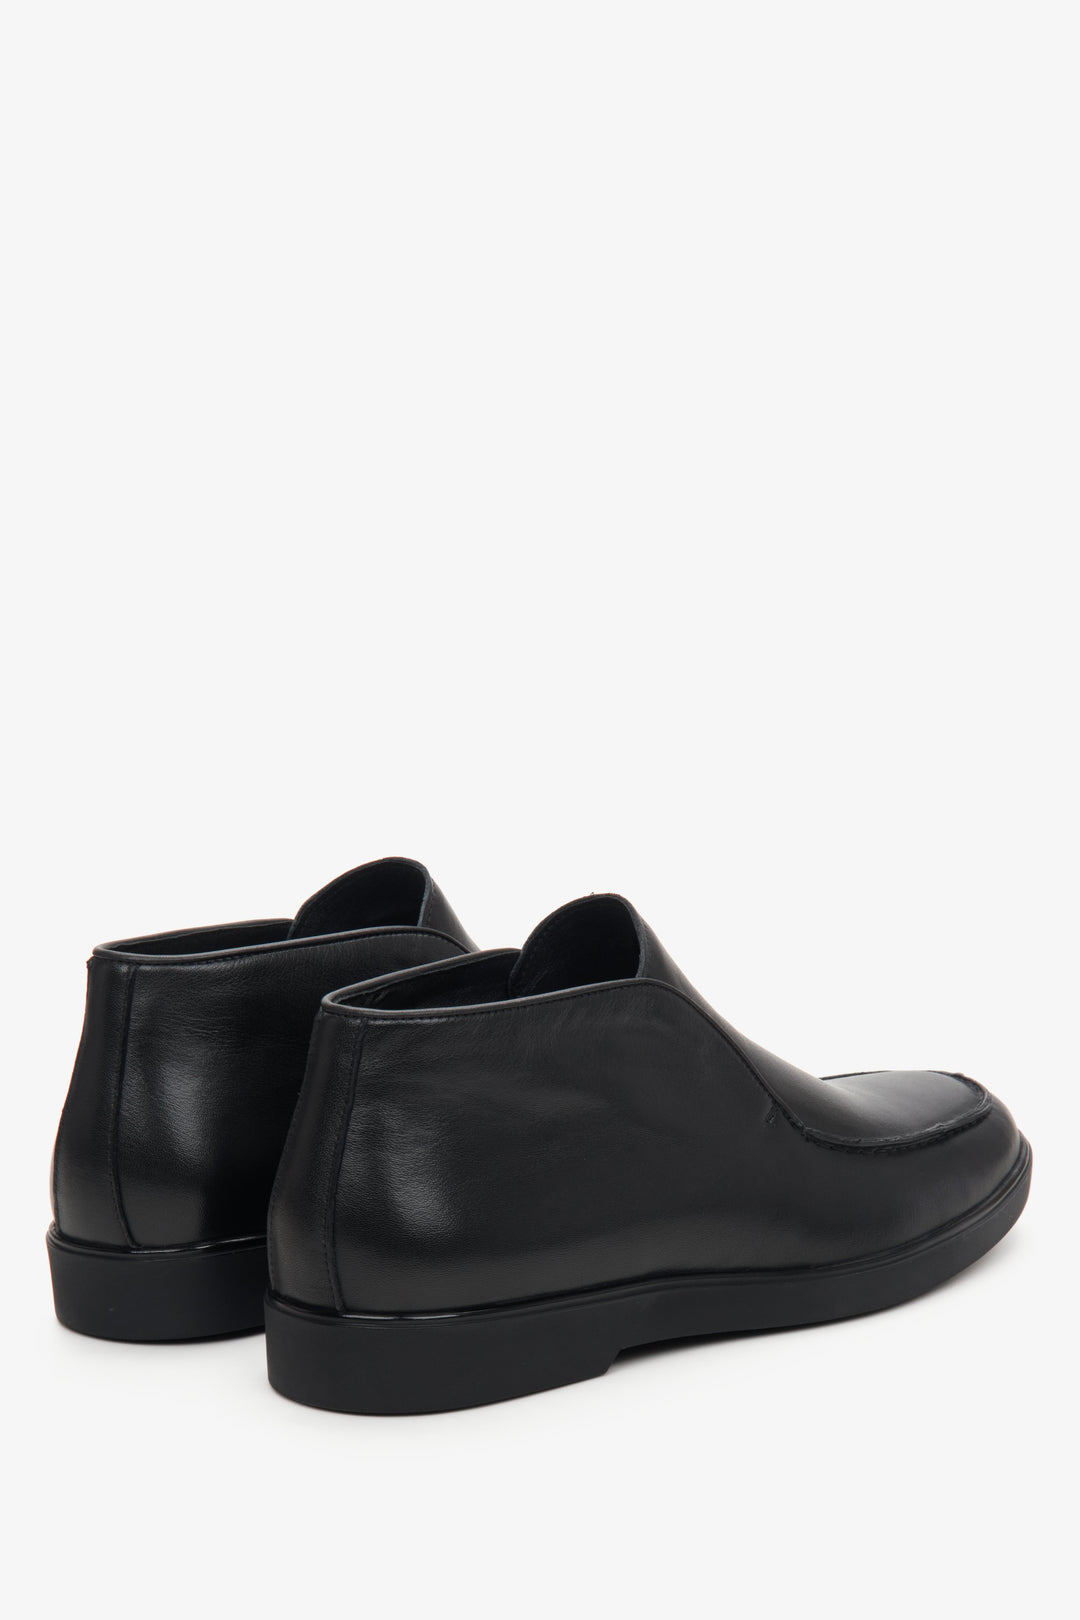 Men's black leather ankle boots for fall - close-up of the heel.